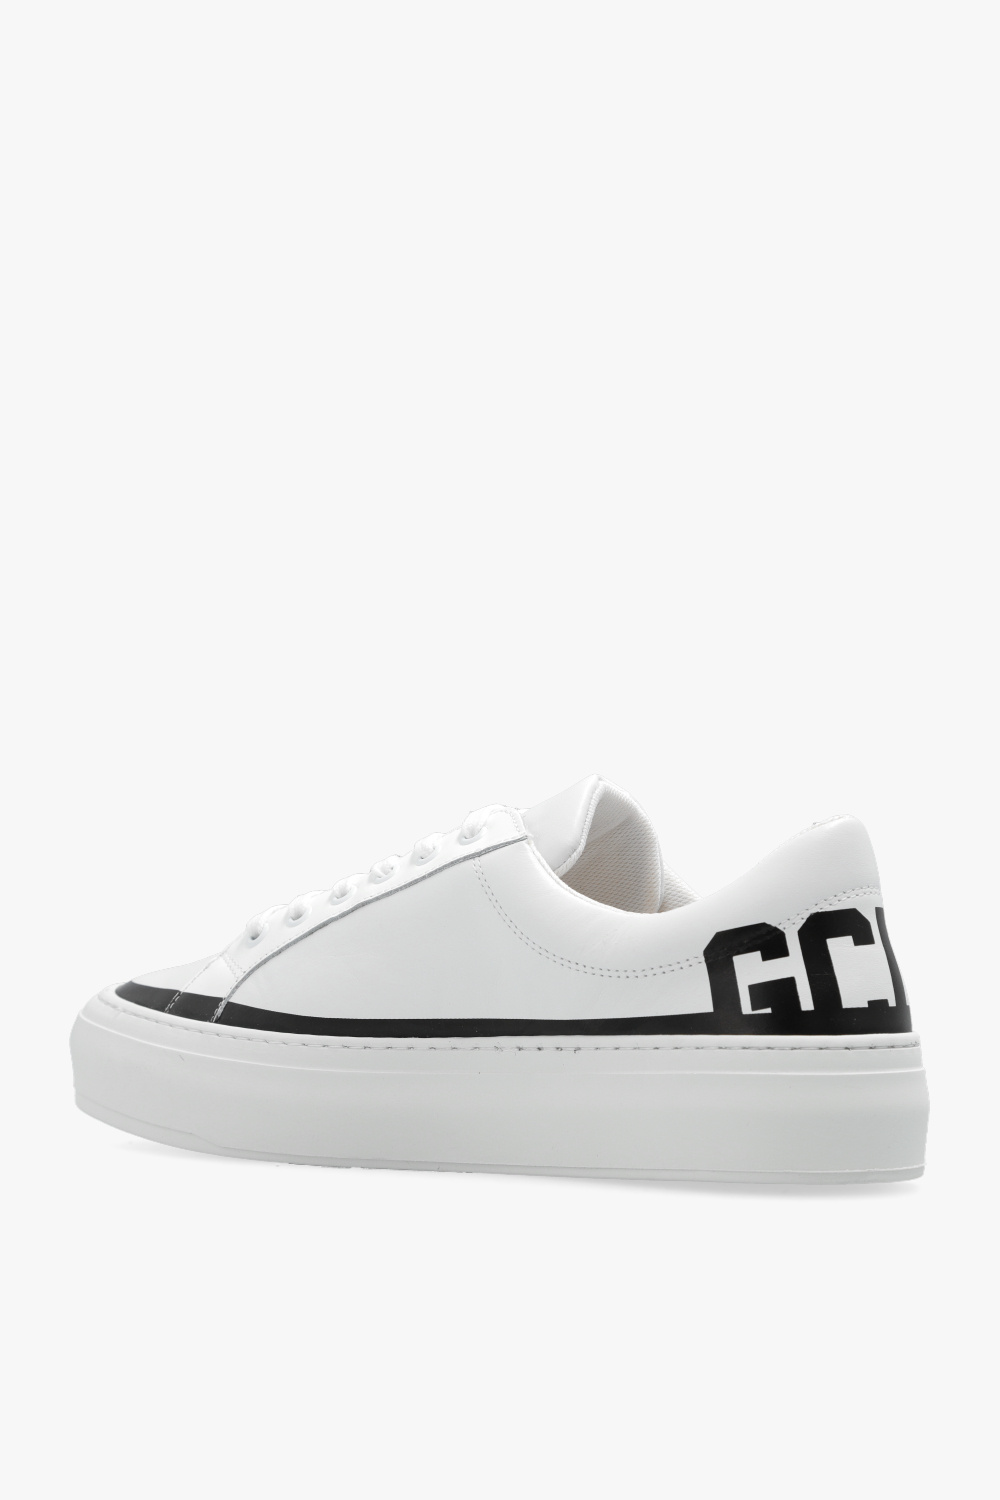 GCDS off white ridged sole lace up shoes item